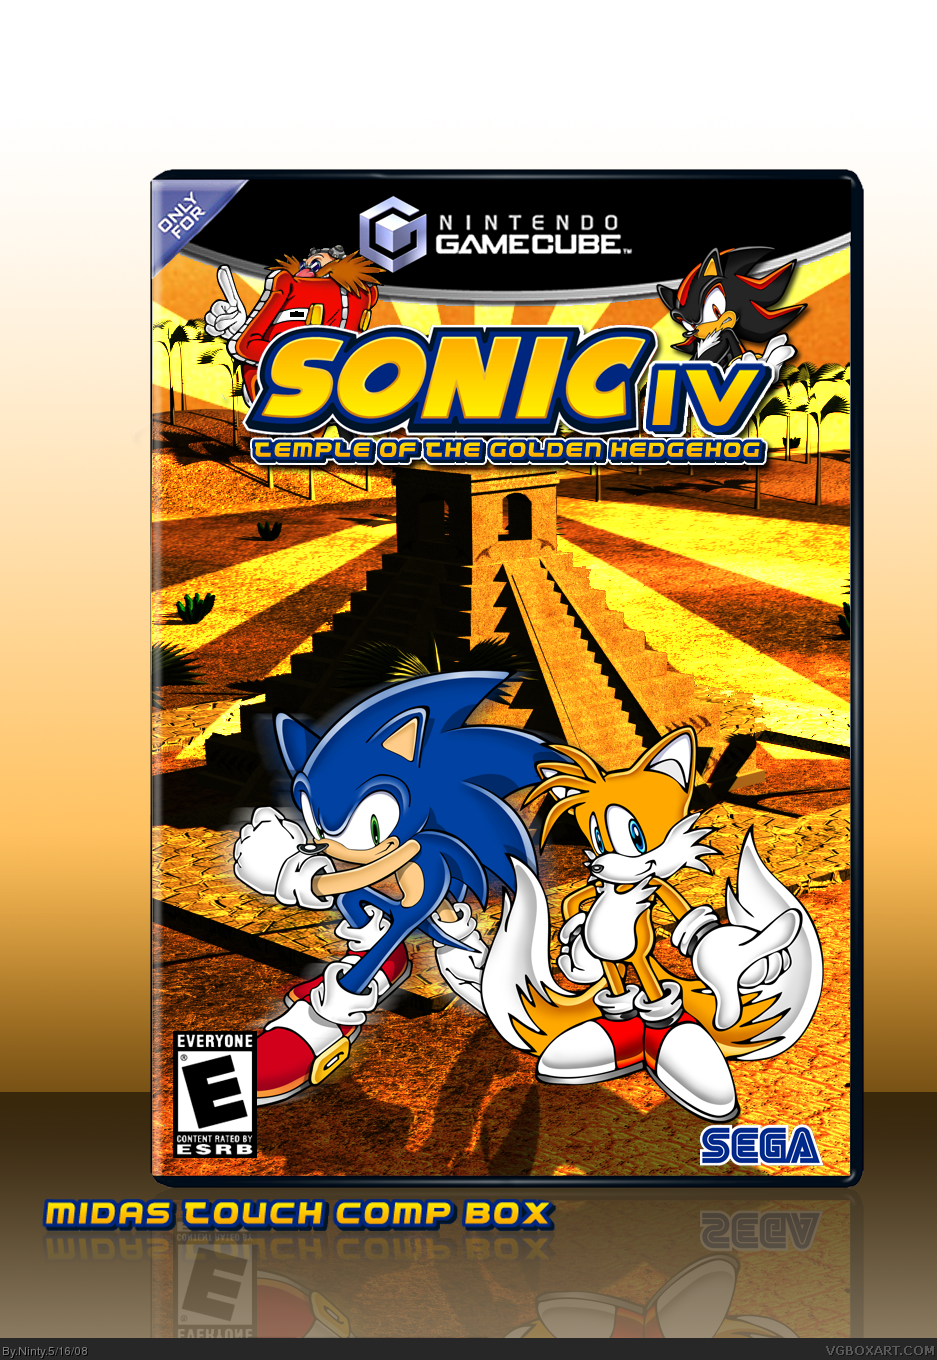 Viewing full size Sonic the Hedgehog IV box cover